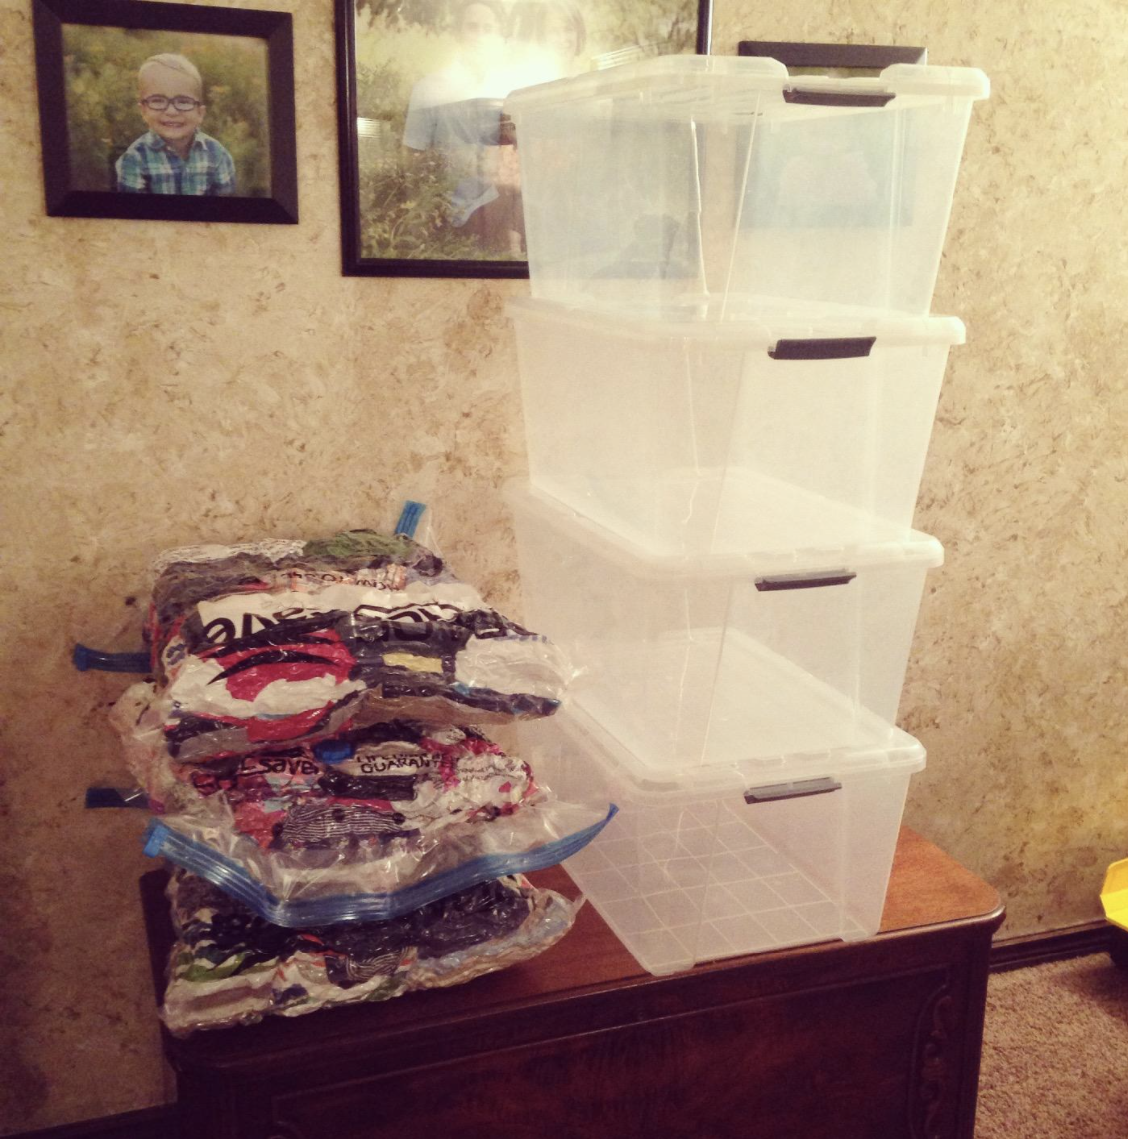 Three space saver bags next to four stacked plastic containers to illustrate the difference in size showing how much space the bags can save as the stack of bags were significantly smaller than the stack of plastic bins